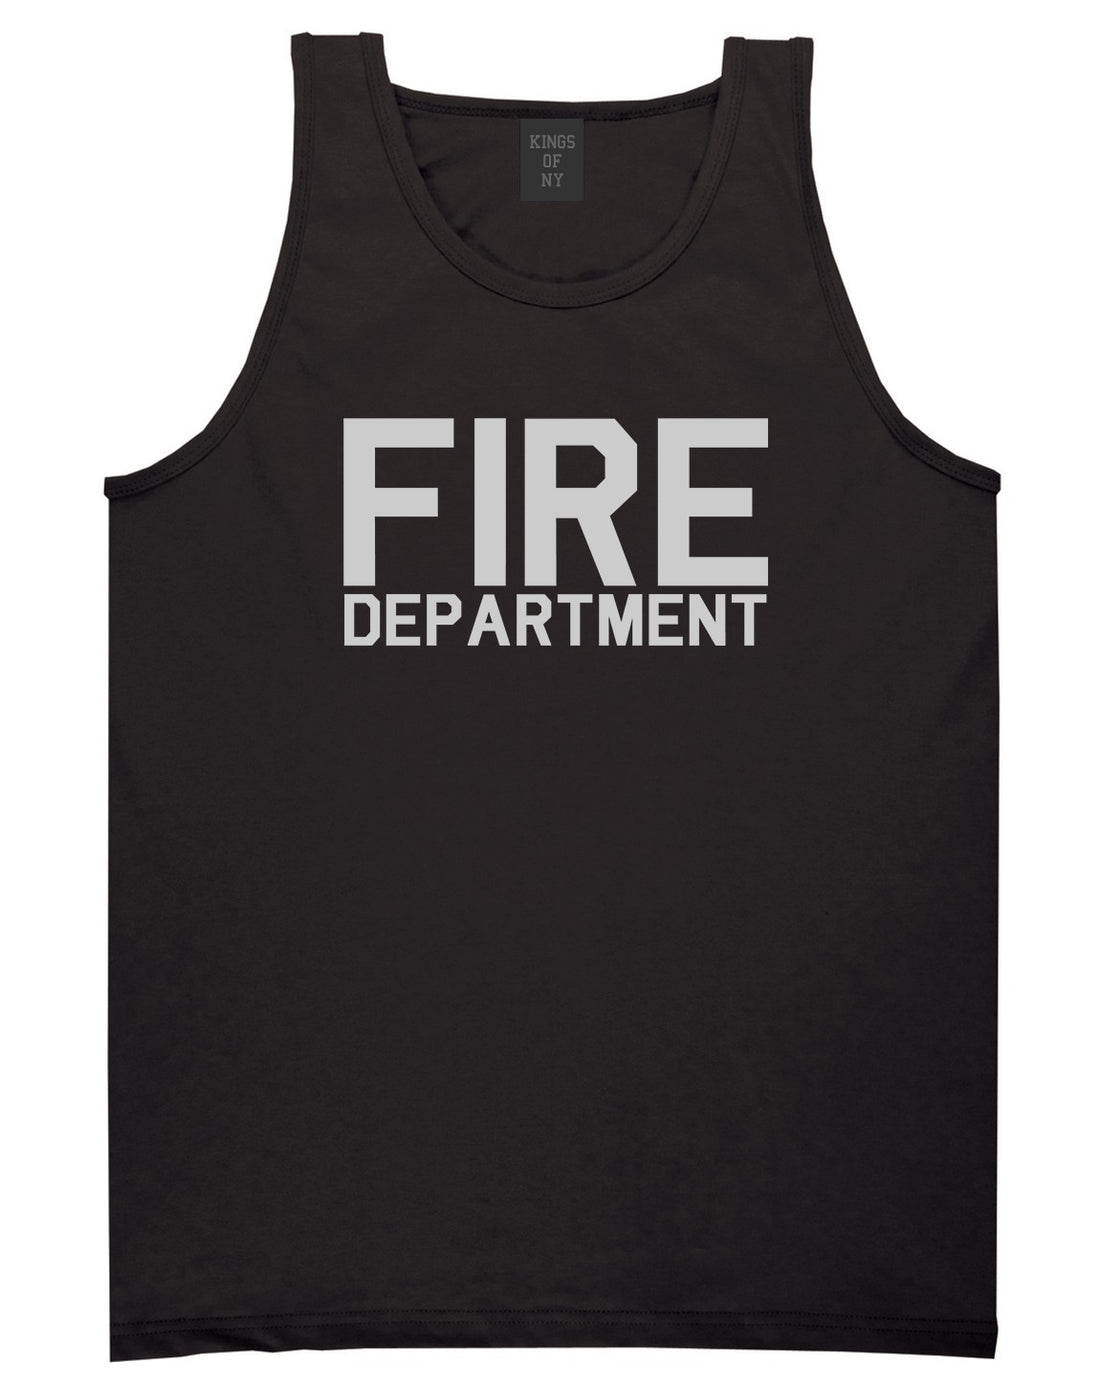 Fire Department Dept Mens Black Tank Top Shirt by KINGS OF NY